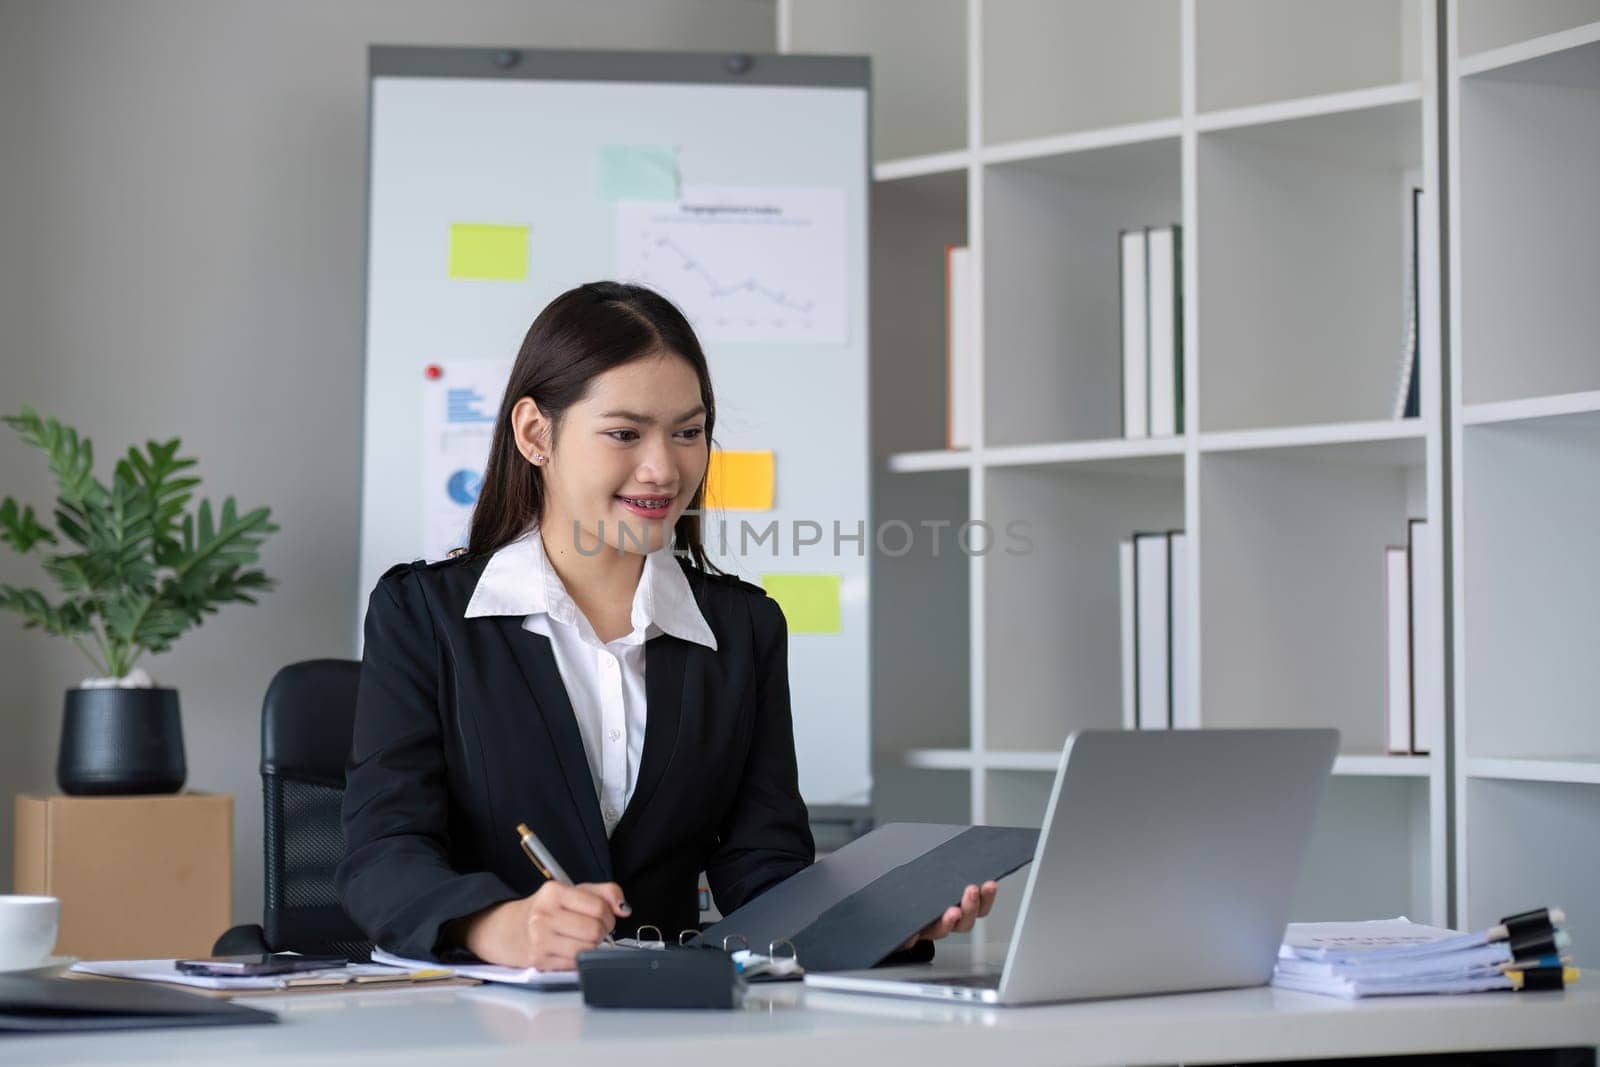 Business documents, business auditor Asian woman is reviewing legal documents, preparing documents or reports for analysis tax accountant documents agreement contract information in office at work by wichayada